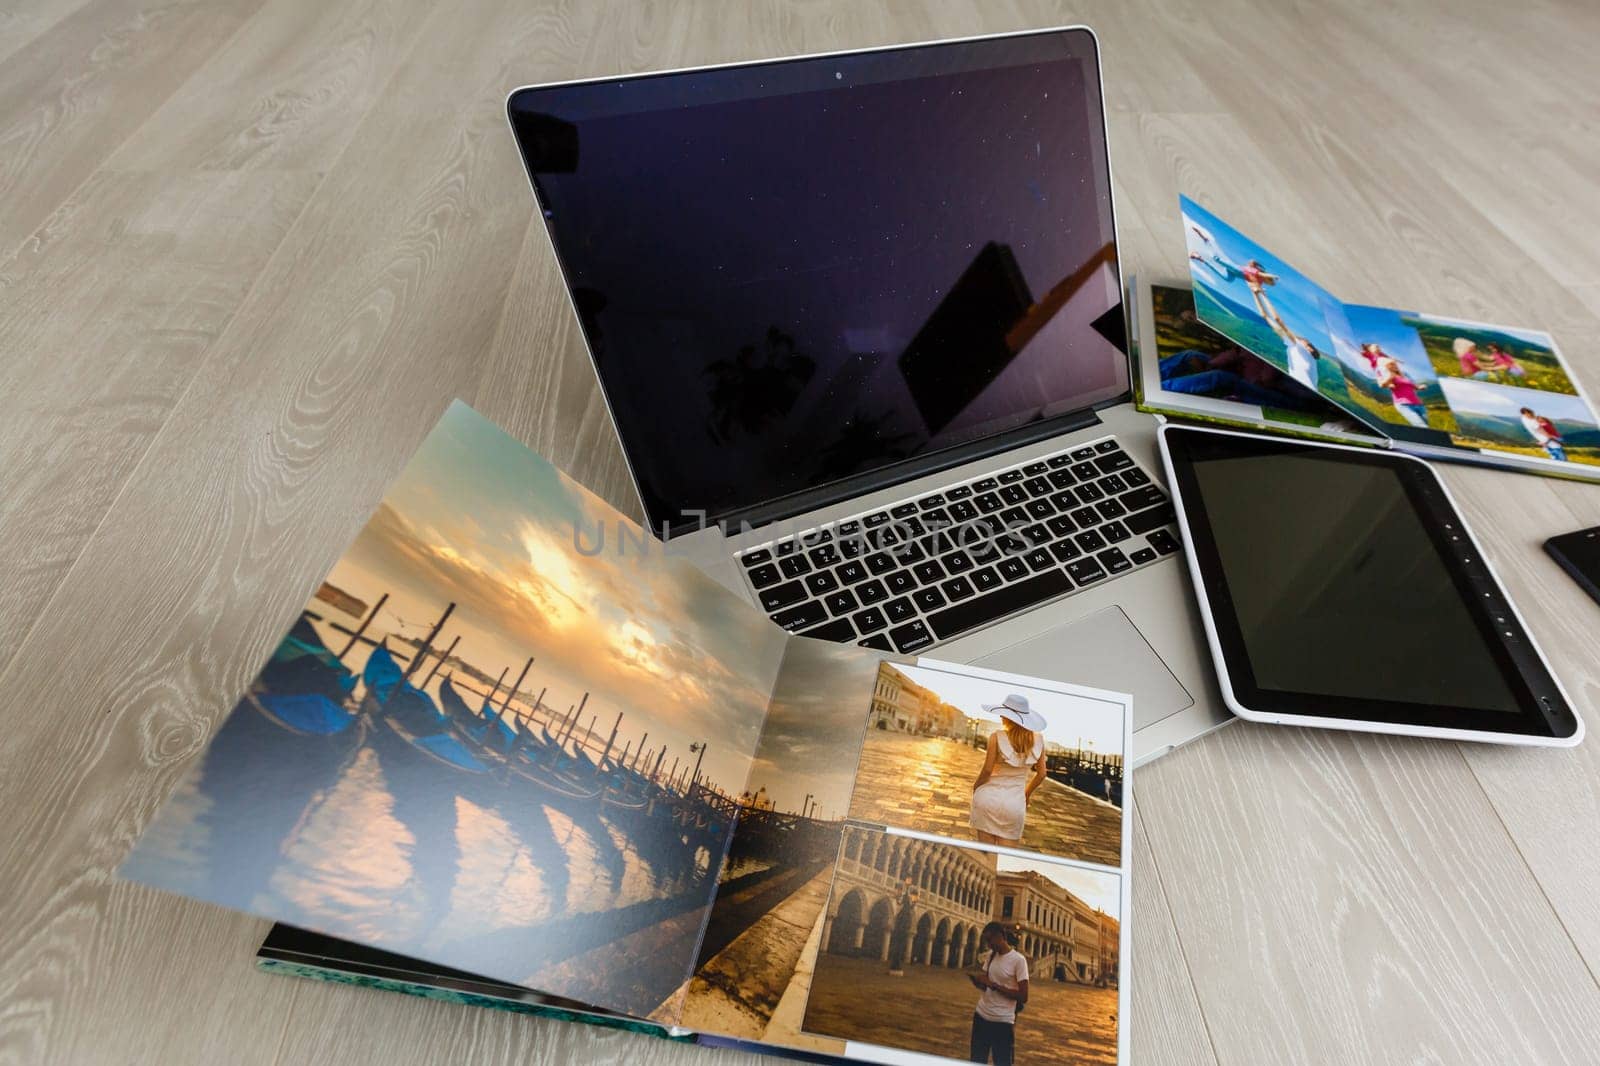 laptop, computer, smartphone, photo book by Andelov13